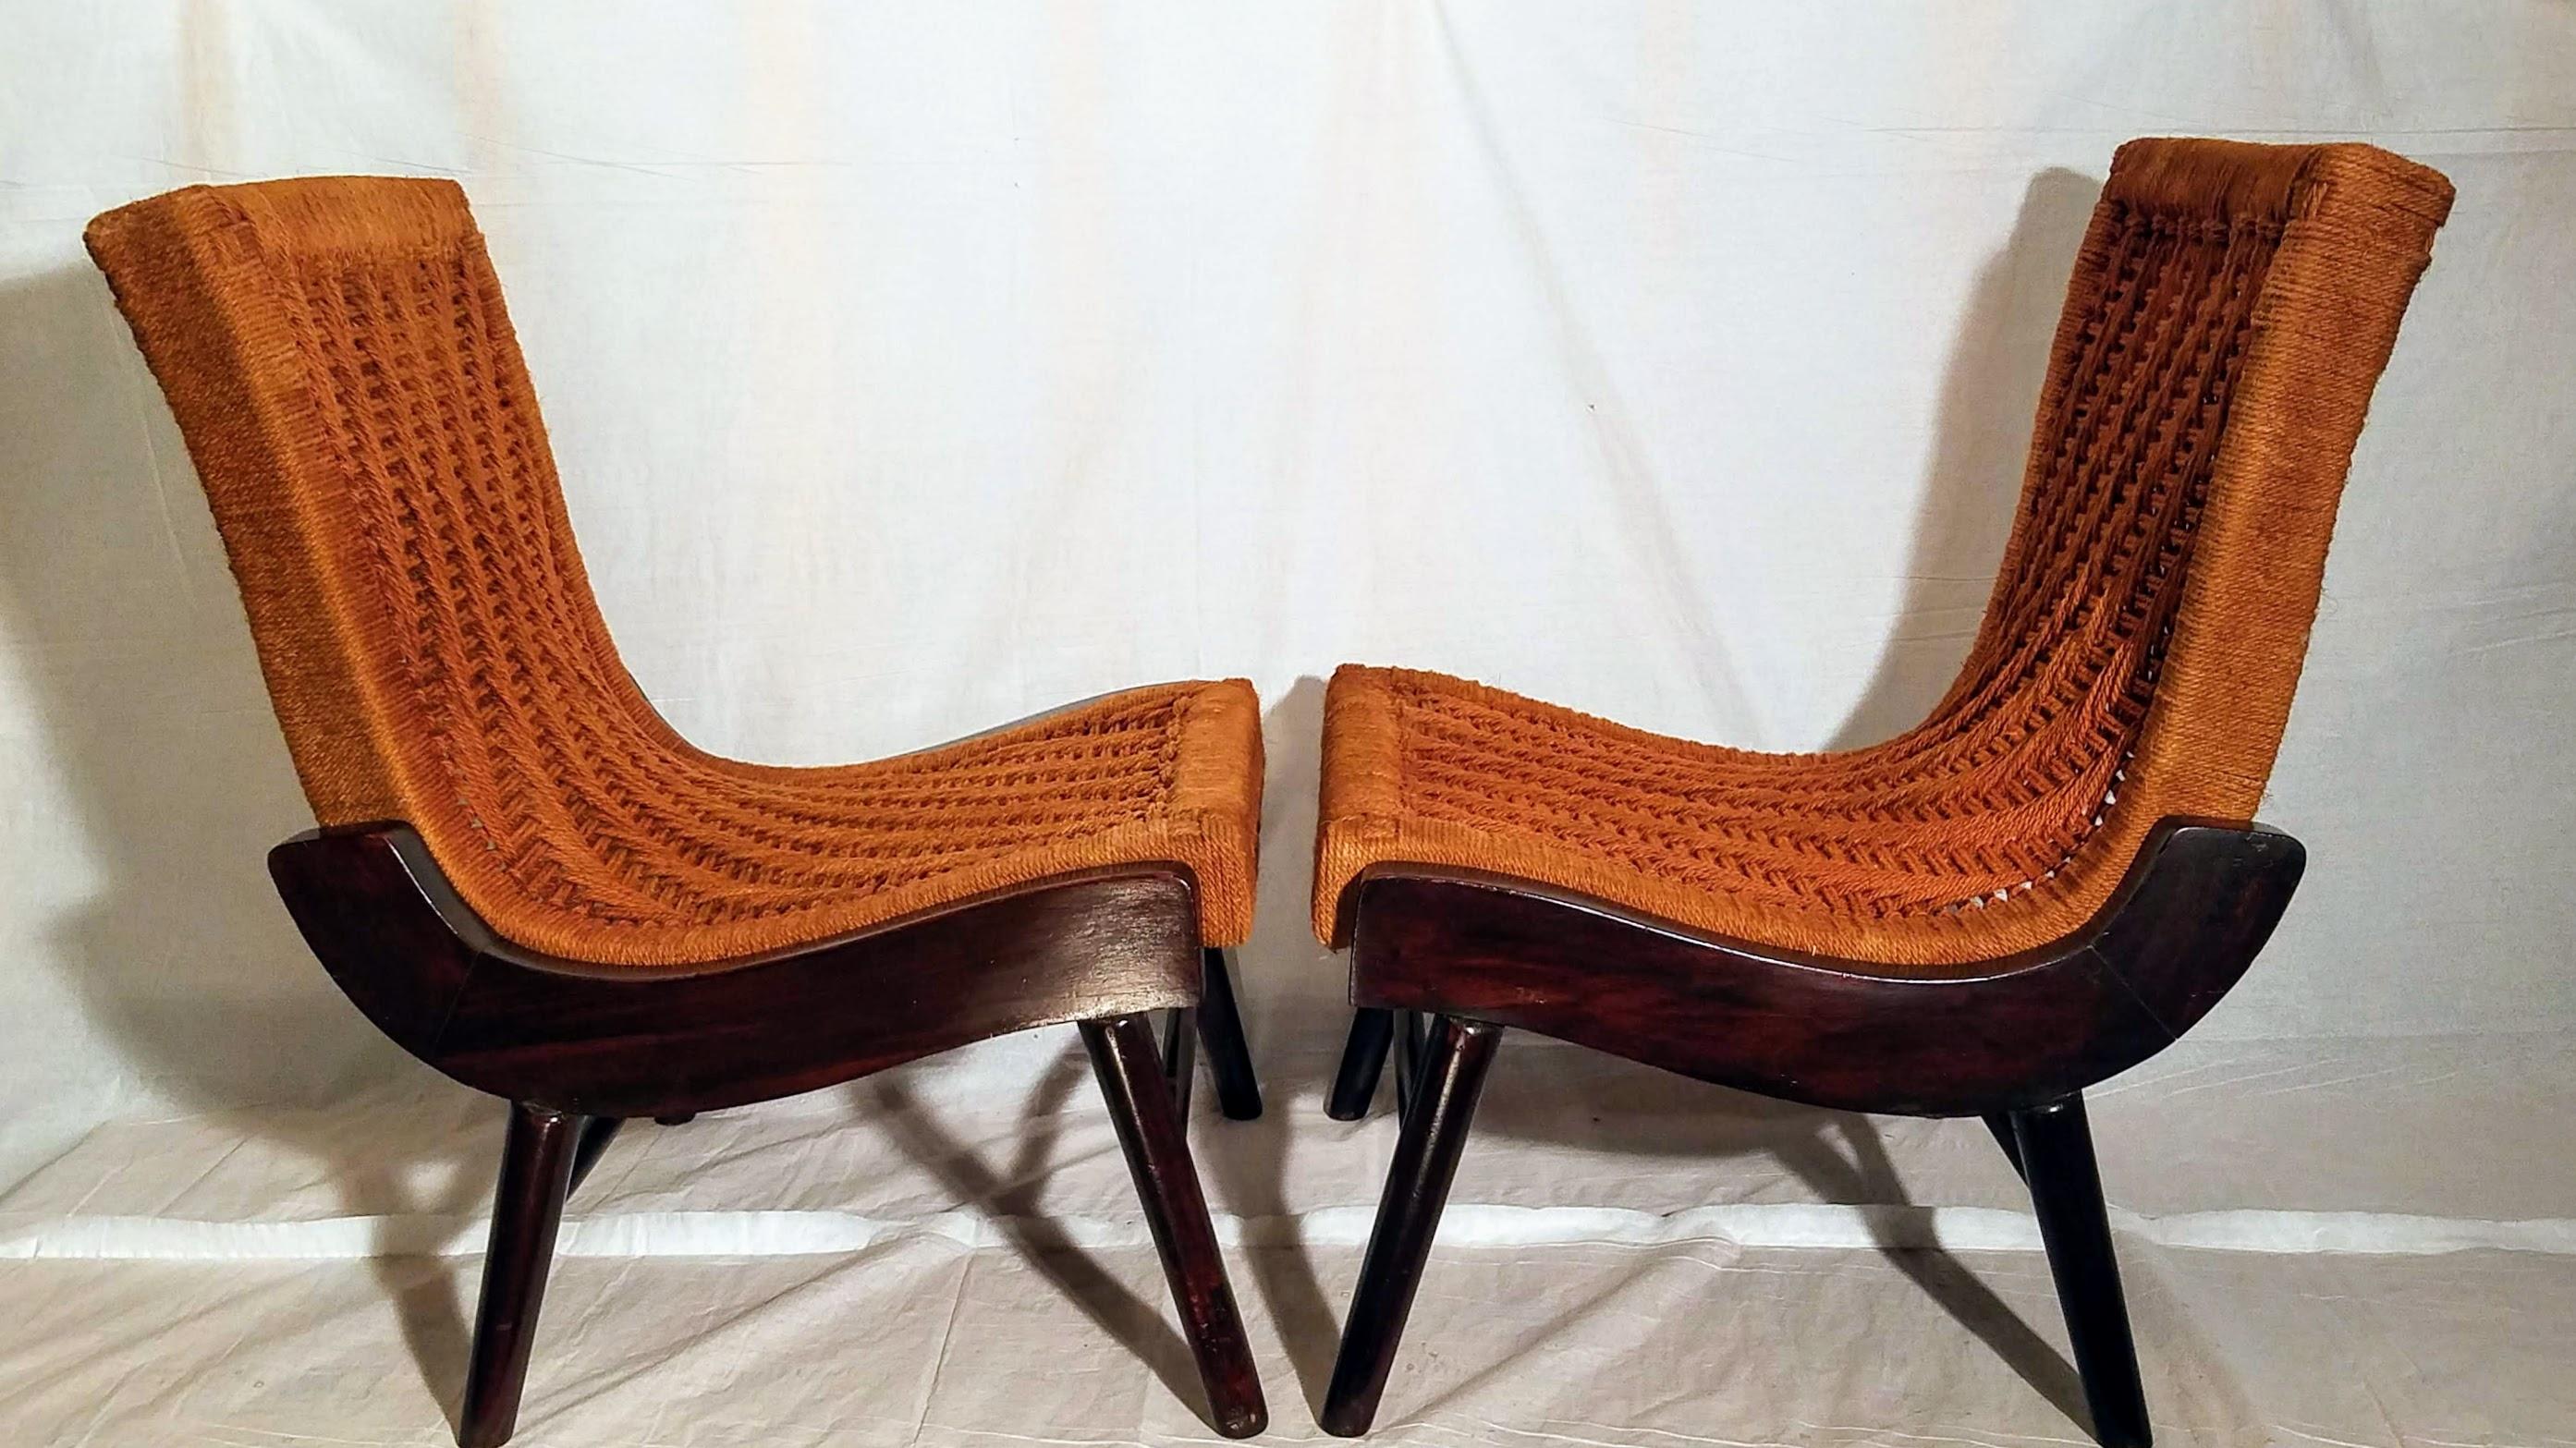 Pair of Cocobolo Rosewood and Hemp Cord 1940s Lounge Chairs Rare For Sale 1